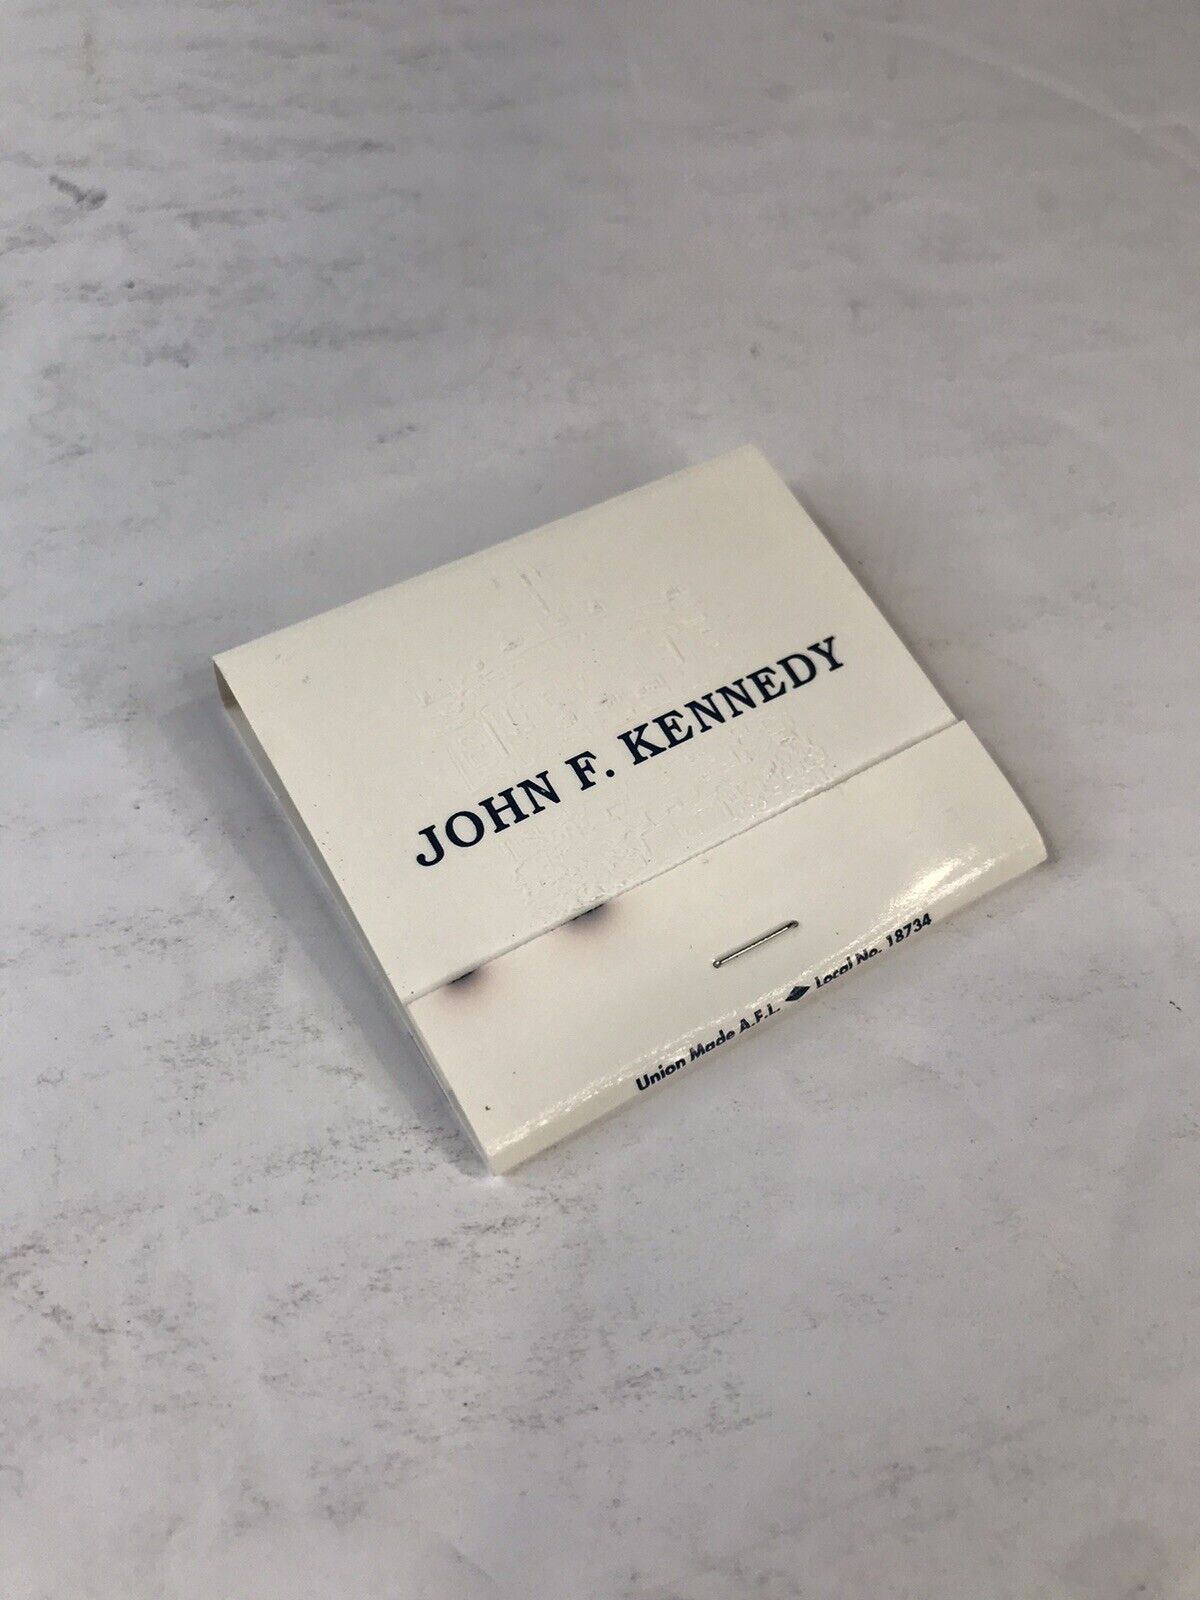 John F. Kennedy,Embossed White House Match Book, Unused, 